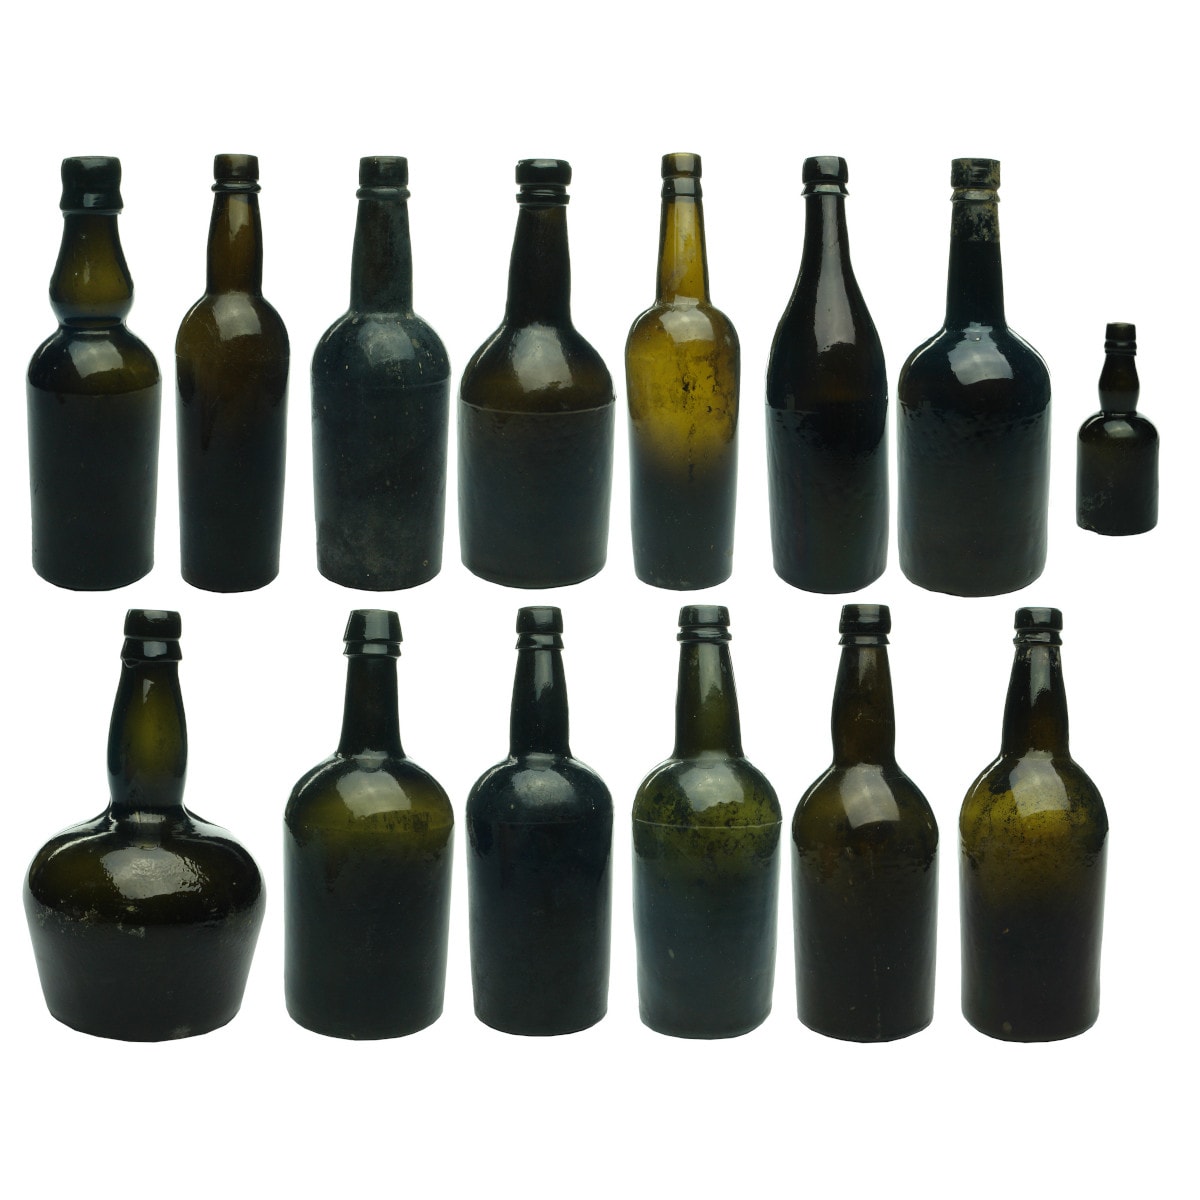 14 Plain black glass bottles. Various shapes and styles. Includes one sample size.